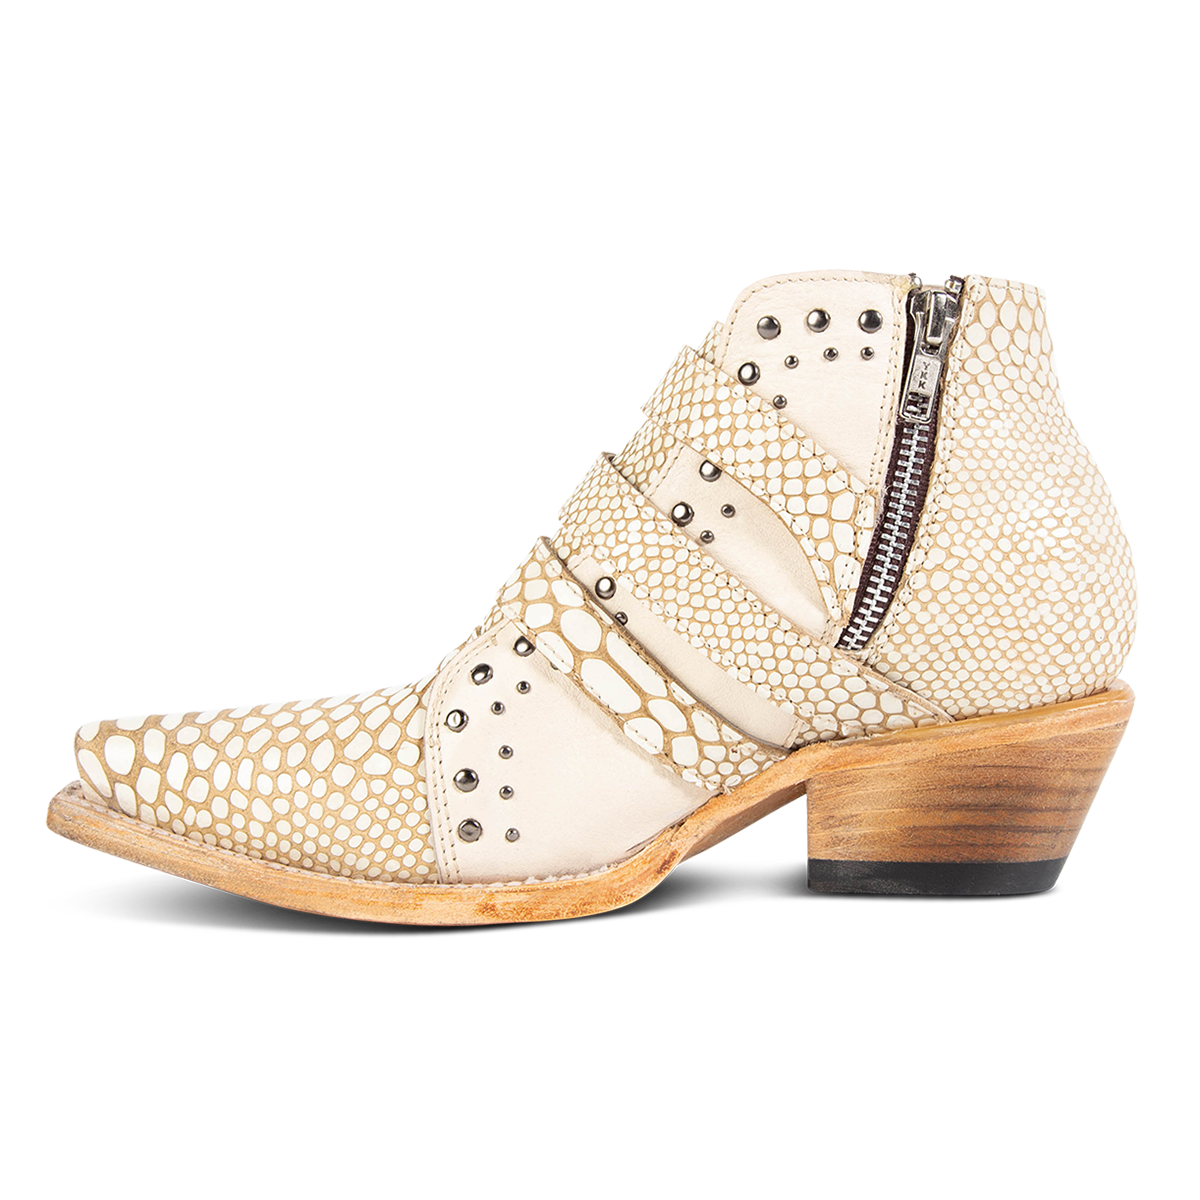 Inside view showing adjustable buckle straps and inside zip closure on FREEBIRD women's Whilhelmina white snake western ankle bootie